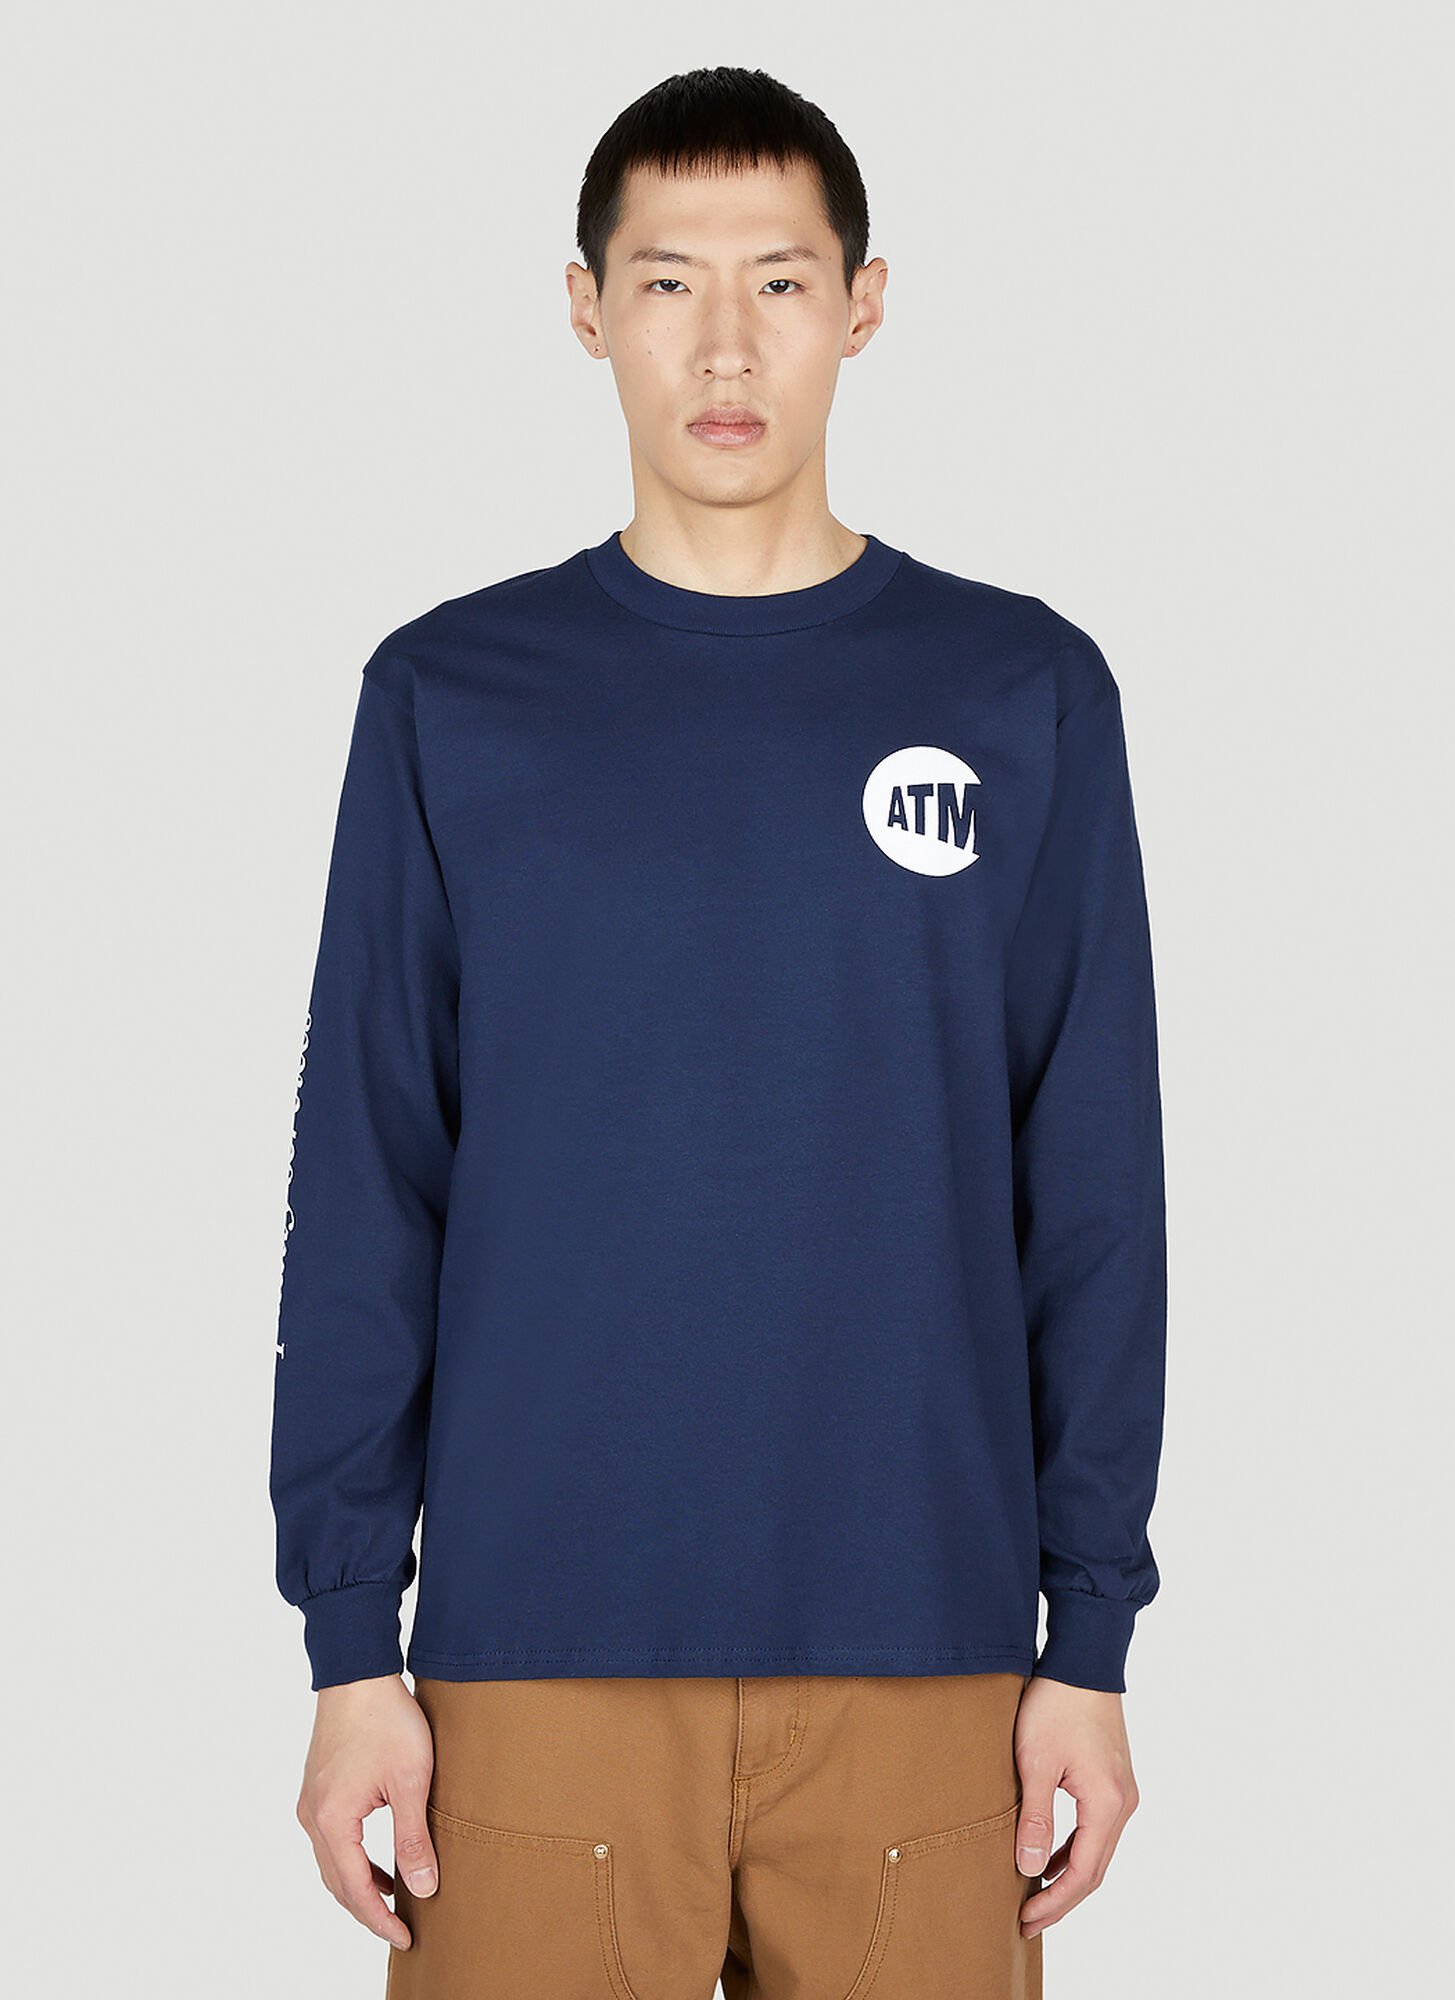 Dtf.nyc Atm Cash Only Long-sleeved T-shirt Male Dark Blue